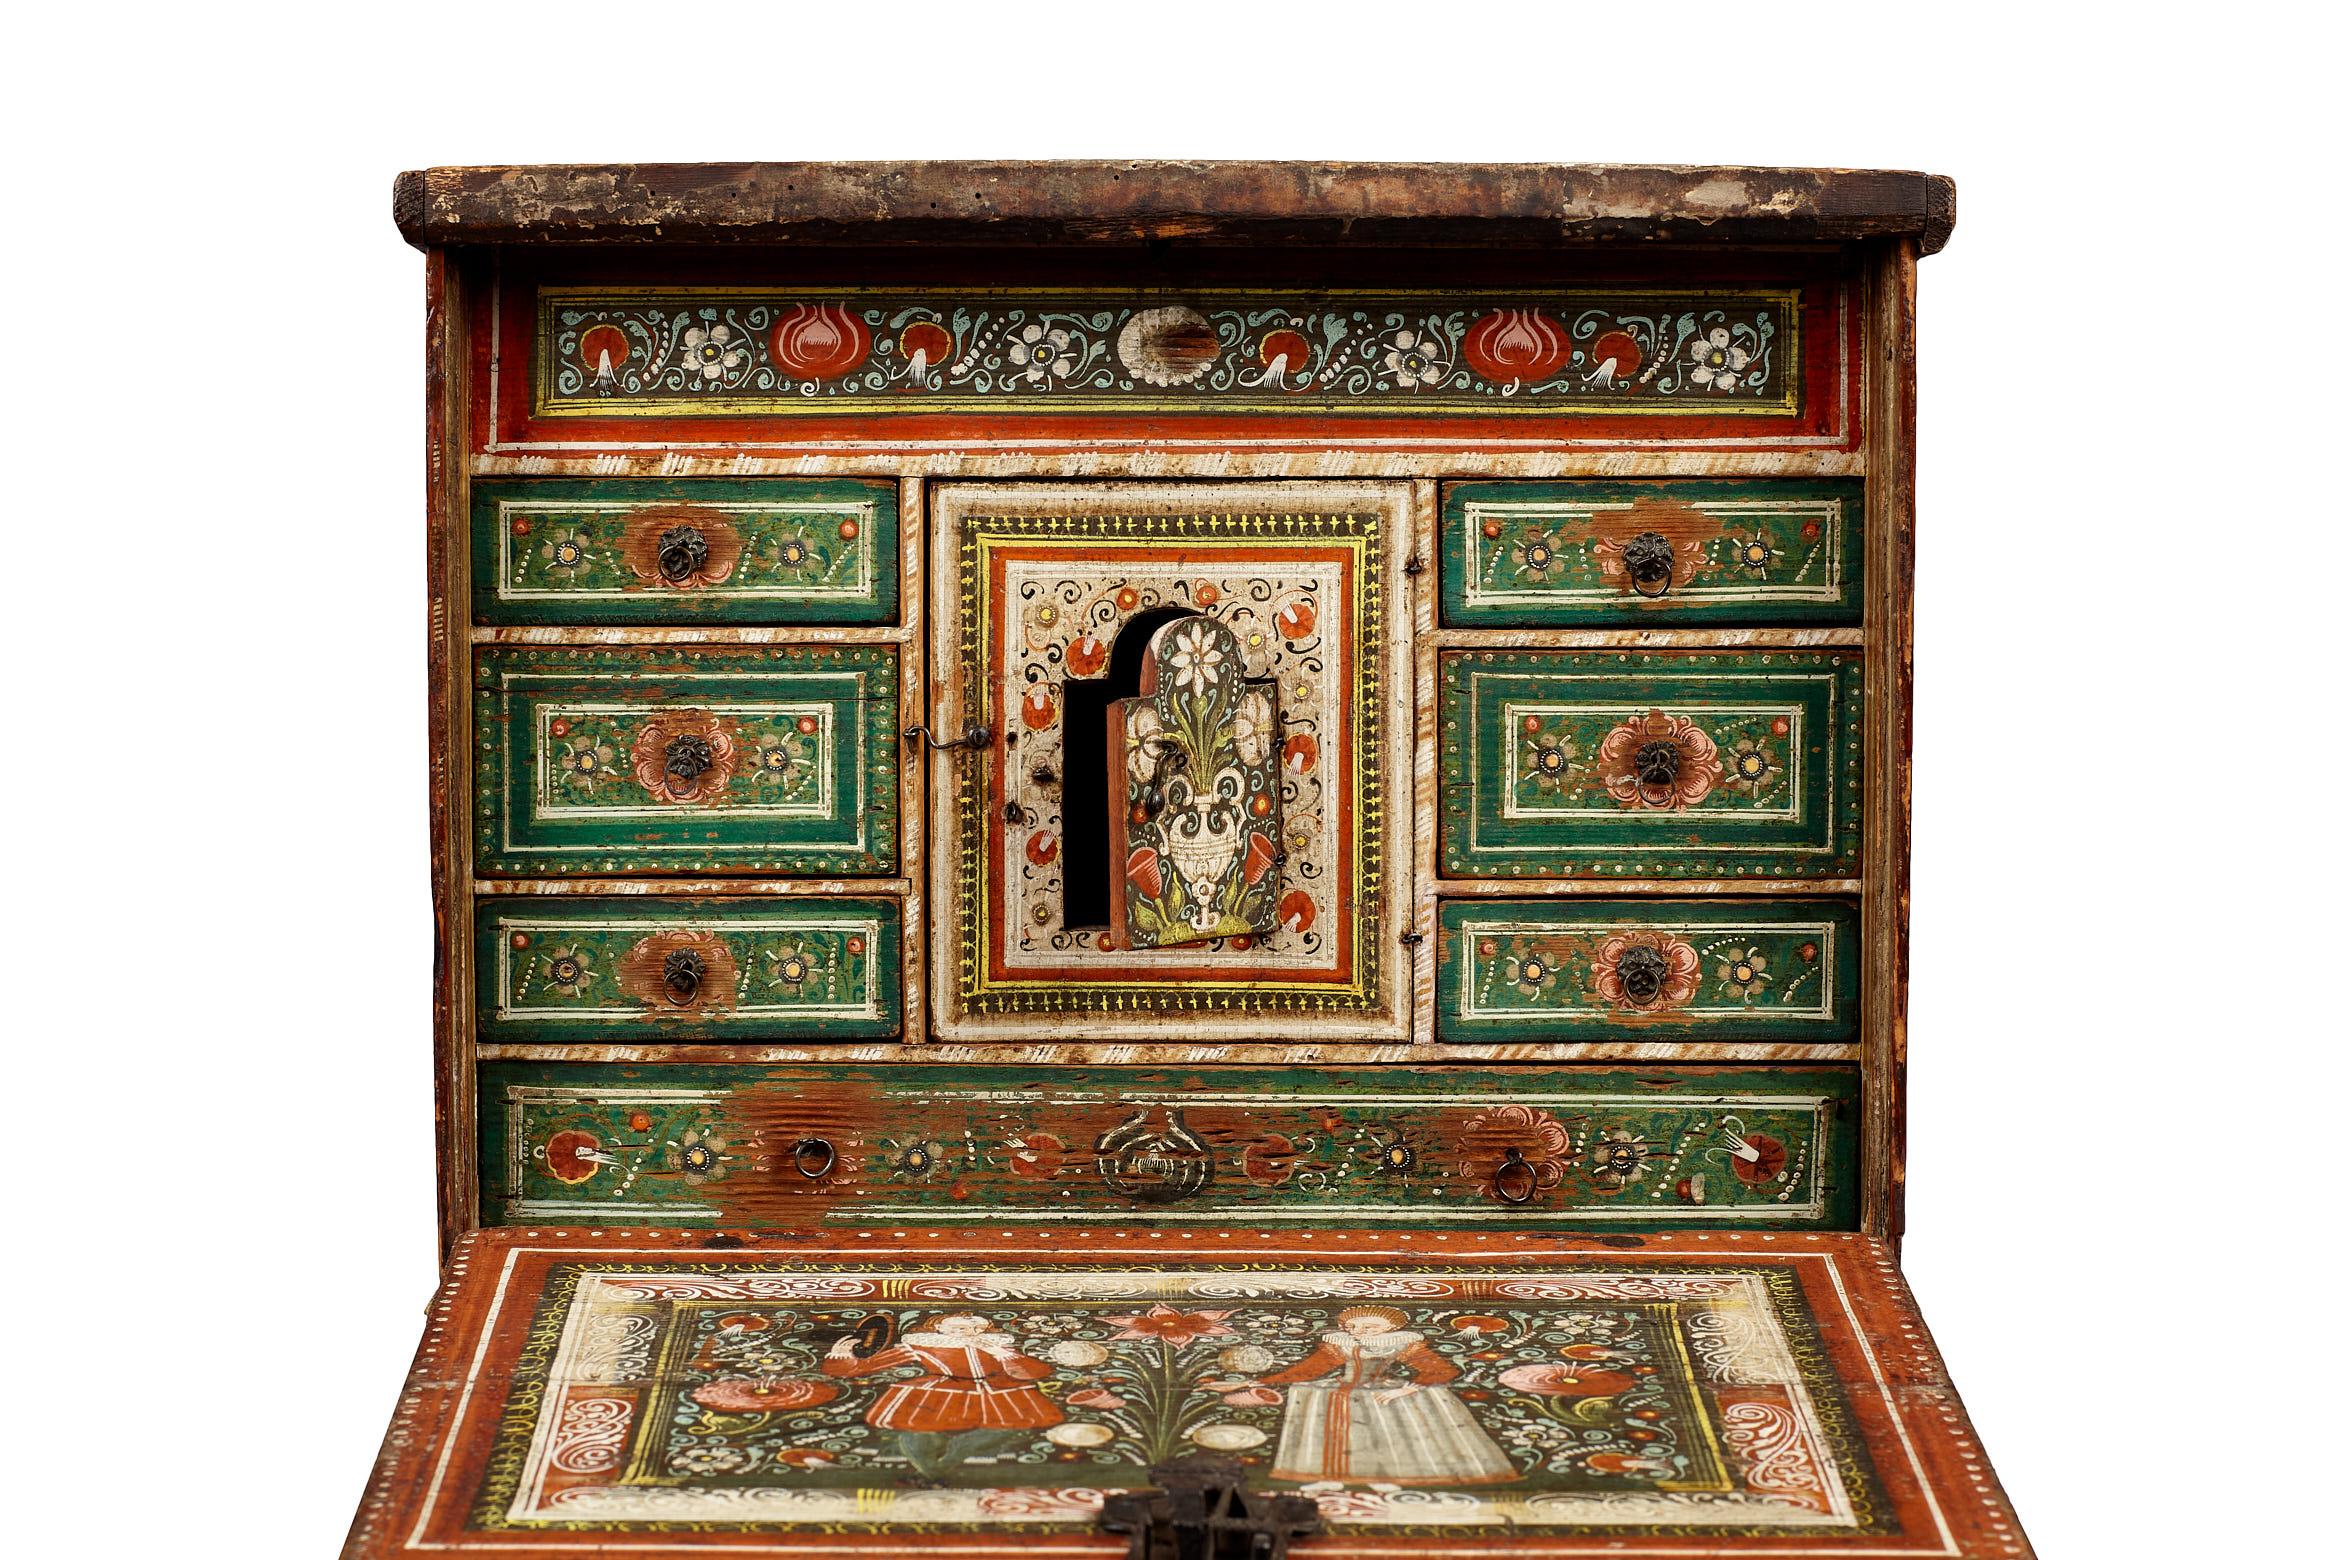 Pine Elizabethan Polychrome Painted Marriage Cabinet, German, circa 1580-1600